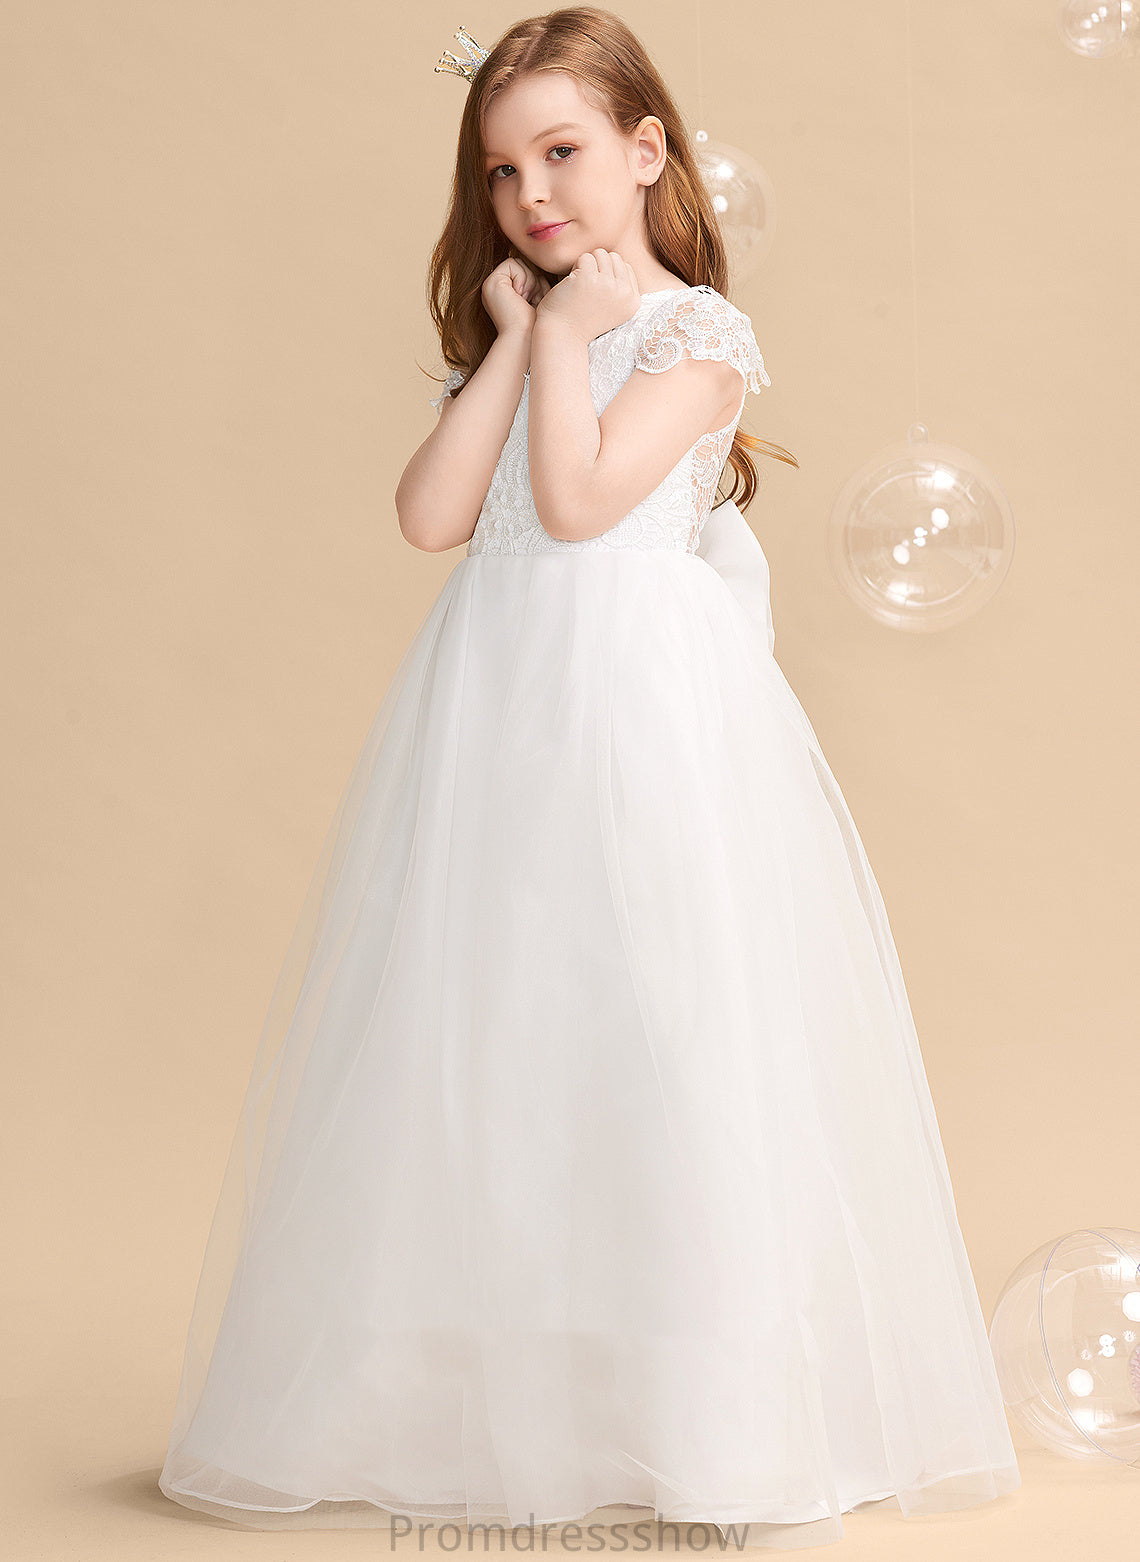 With Kiley Short Floor-length Ball-Gown/Princess - Flower Girl Dresses Tulle/Lace Neck Sleeves Dress Girl Flower Bow(s) Scoop